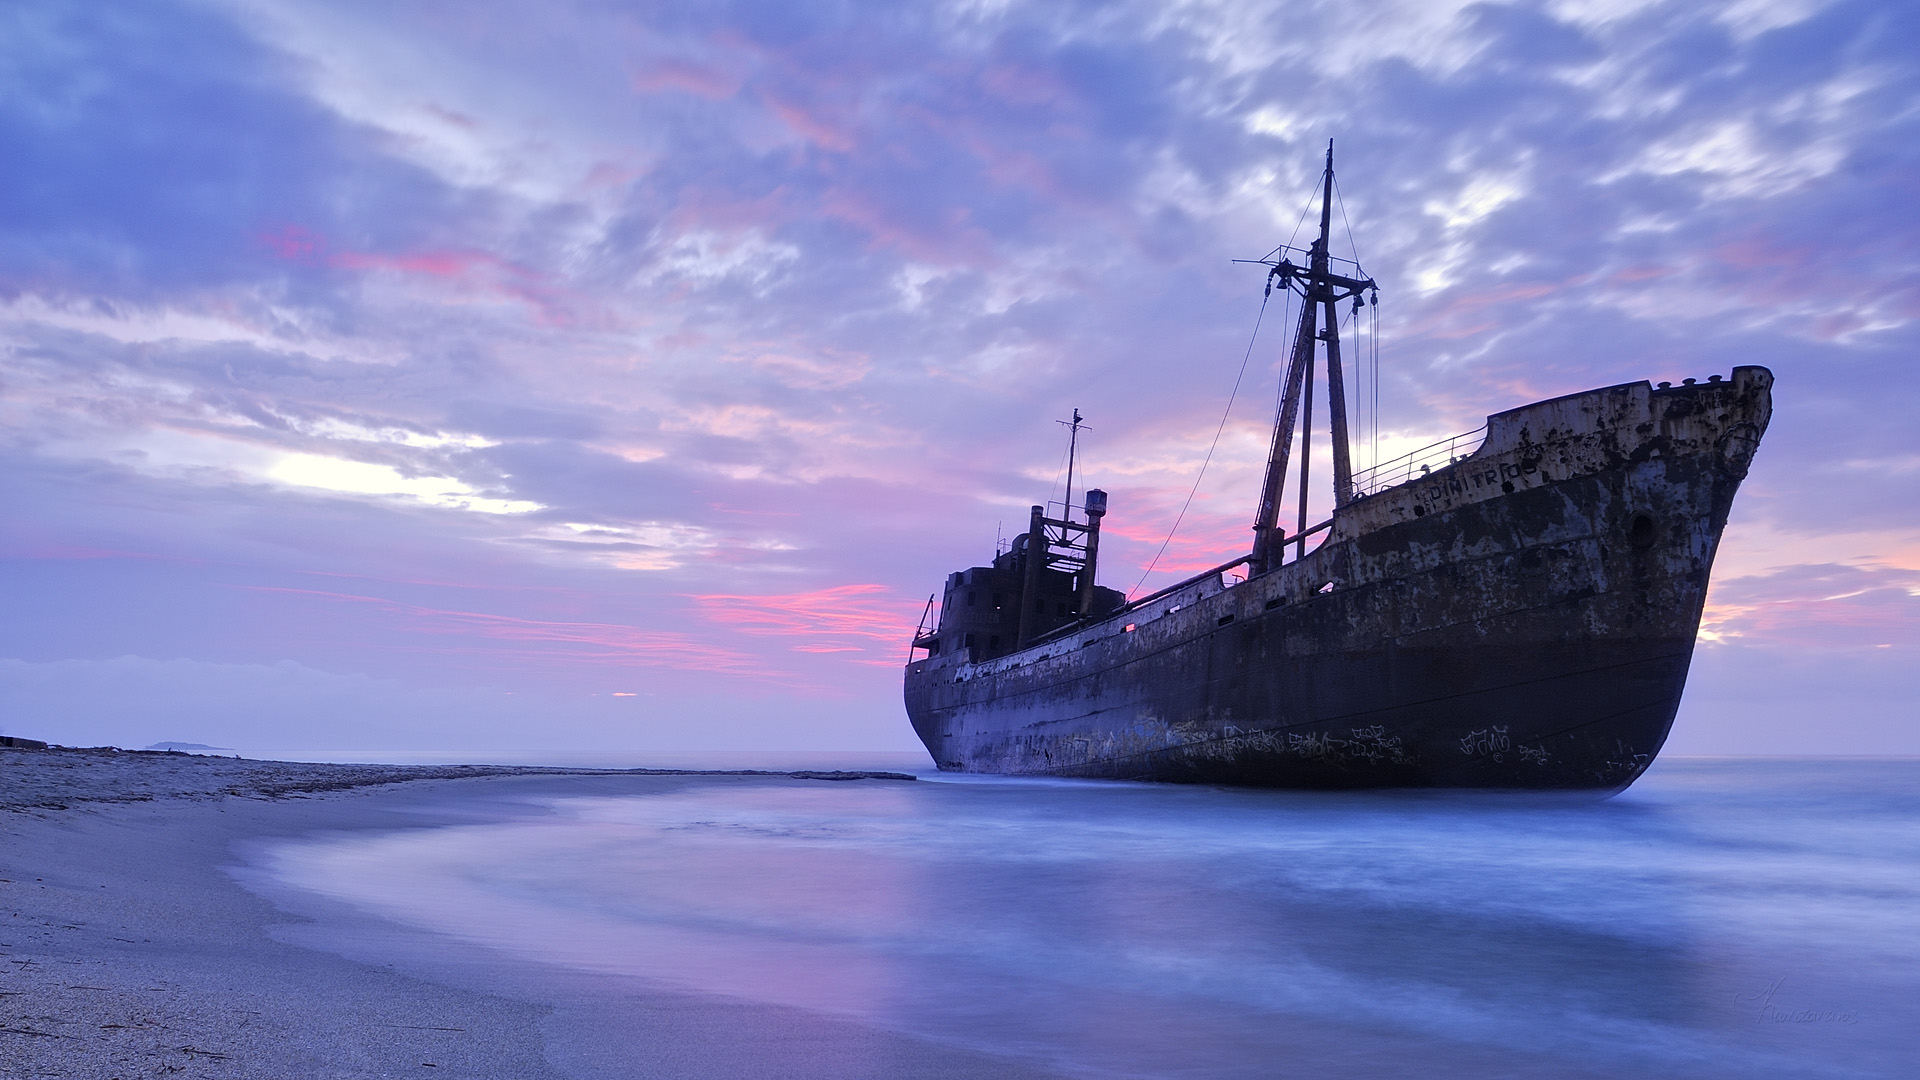 Ship is stranded full hd wallpaper Full HD Wallpapers download